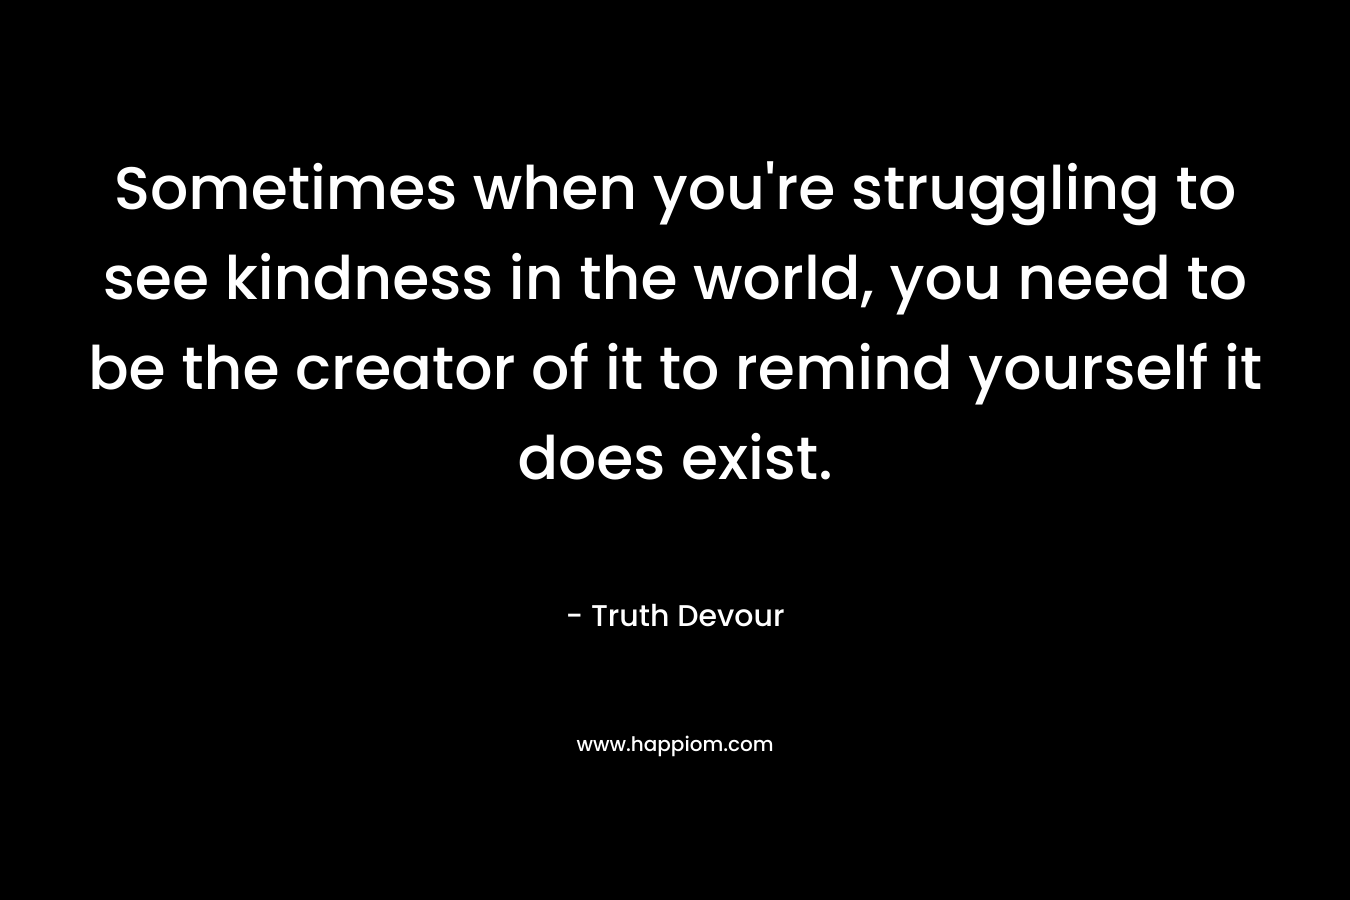 Sometimes when you’re struggling to see kindness in the world, you need to be the creator of it to remind yourself it does exist. – Truth Devour